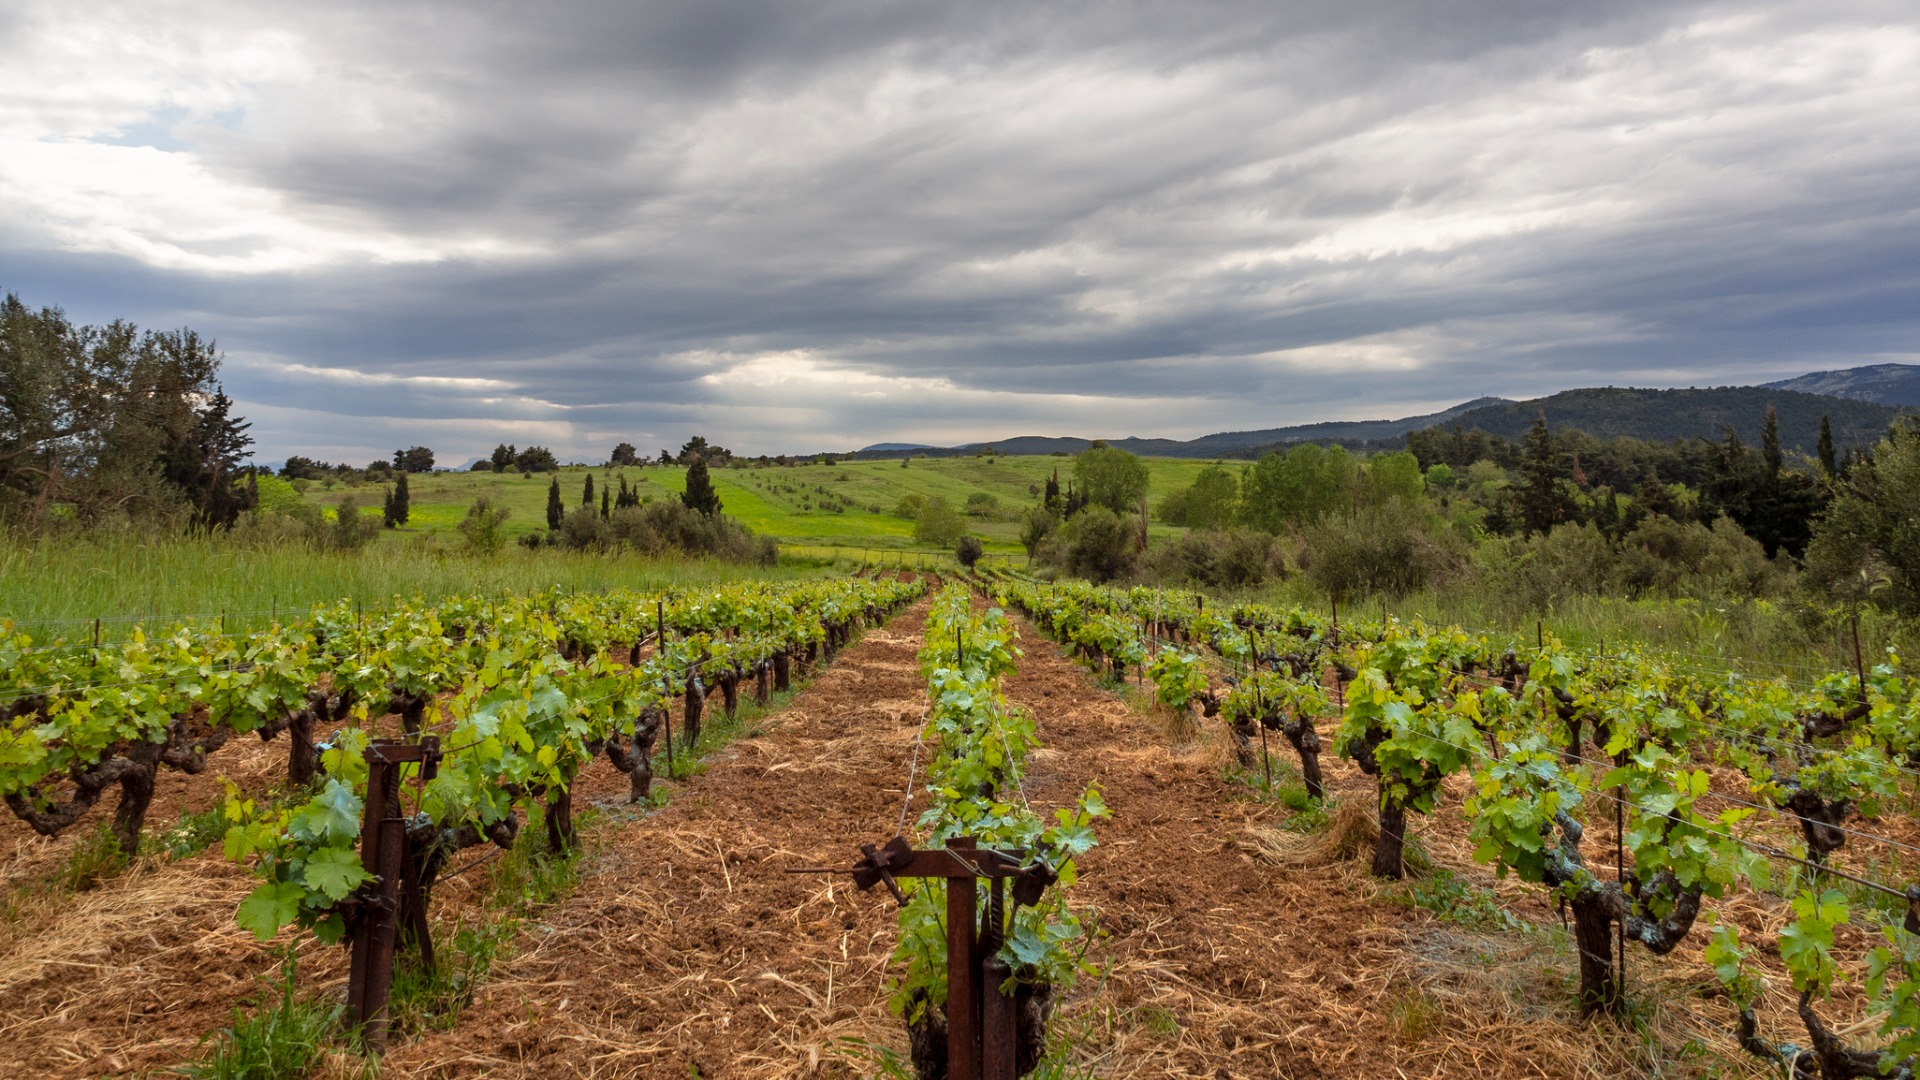 This image shows vineyards stretching for as far as the eye can see. In the background, there's a green hill and a mountain under a dramatic cloudy sky. 